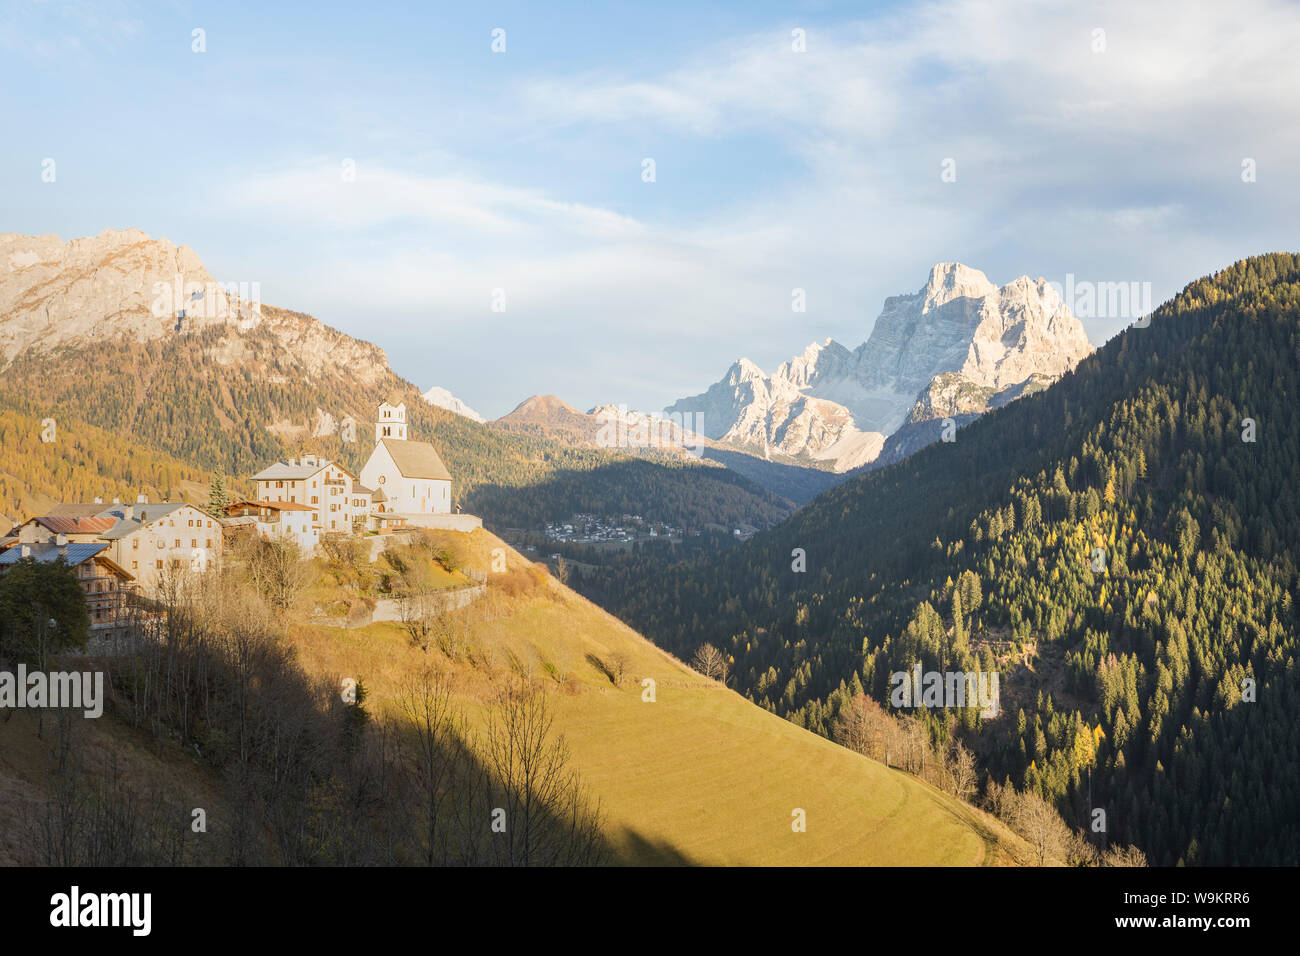 Selva di Cadore backed by the beautiful Dolomites, Italy. Stock Photo